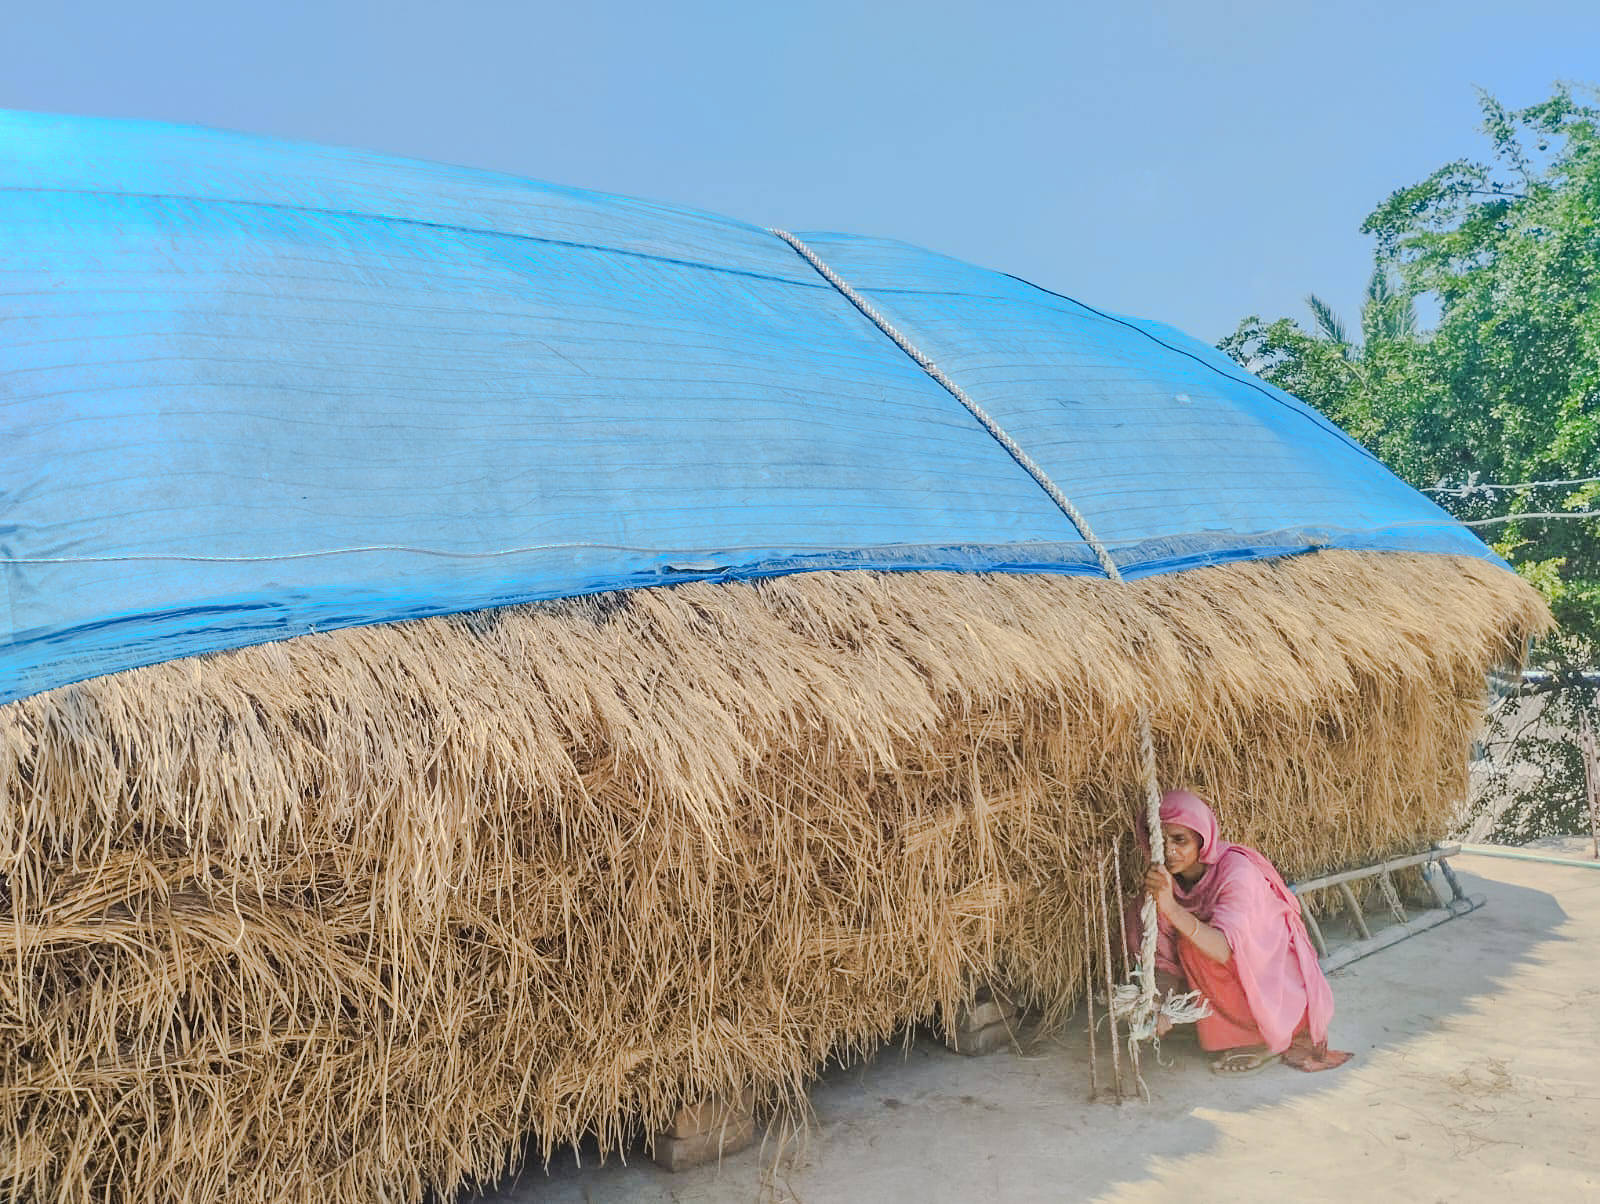  A project beneficiary in Satkhira district protects her fodder by securing it with rope and polythene to prevent damage from wind and rain